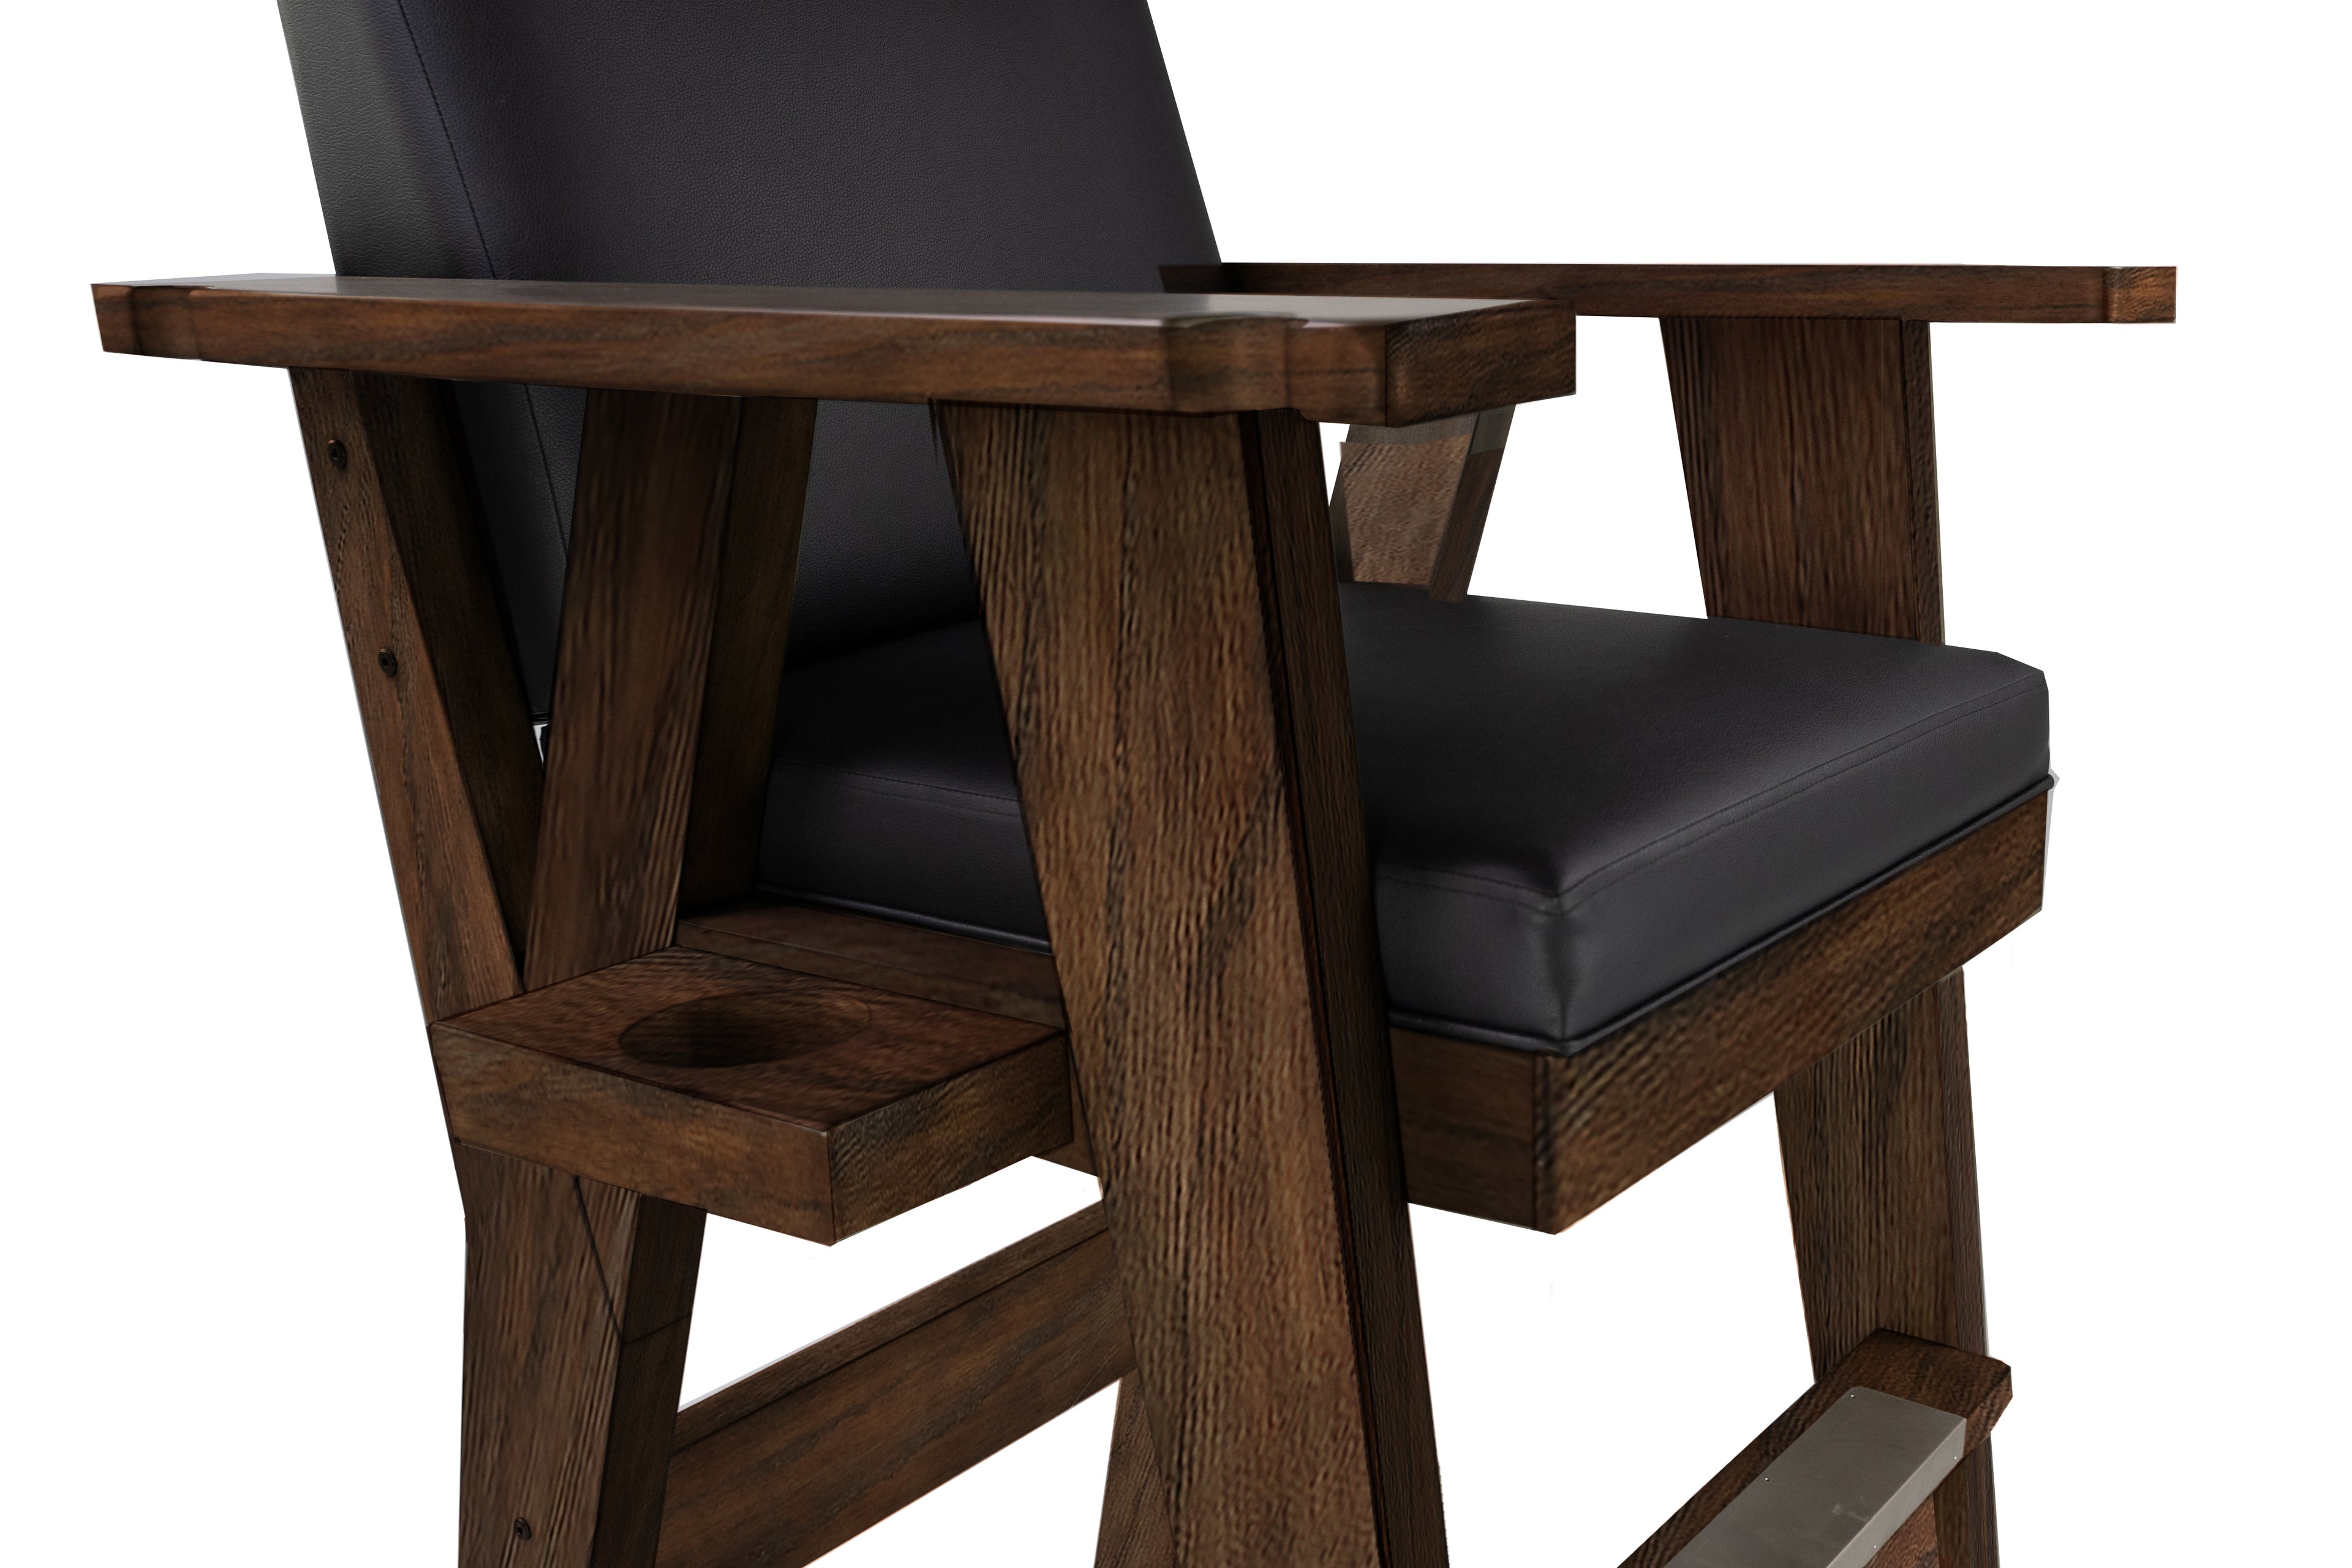 Legacy Billiards Sterling Spectator Chair in Whiskey Barrel Finish - Seat Closeup